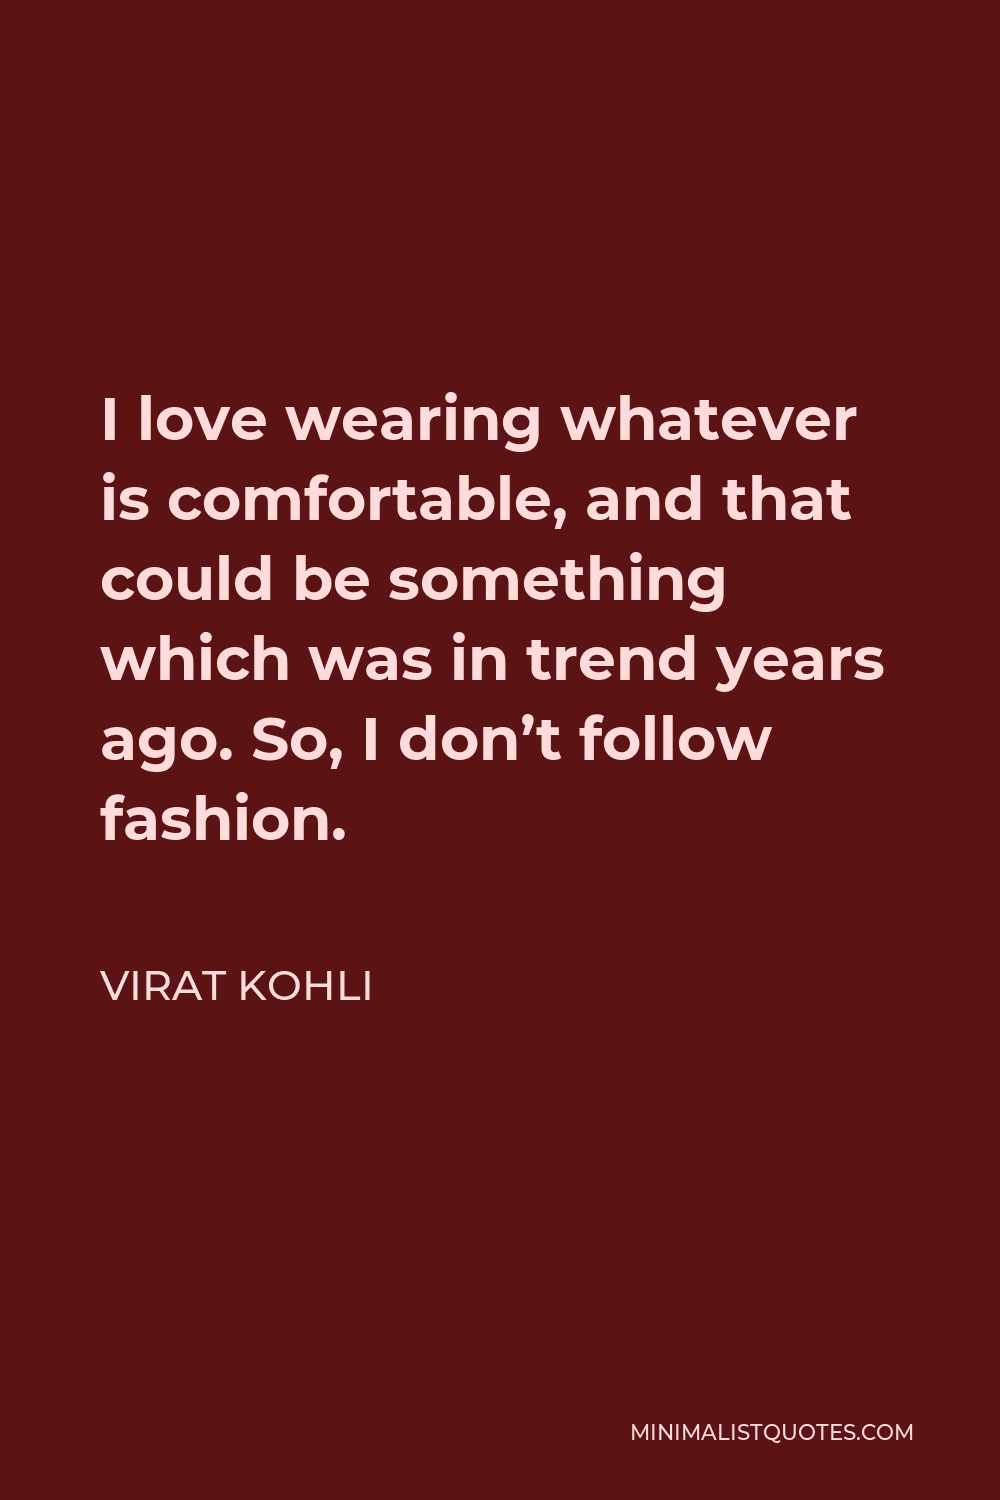 Virat Kohli Quote - I love wearing whatever is comfortable, and that could be something which was in trend years ago. So, I don’t follow fashion.